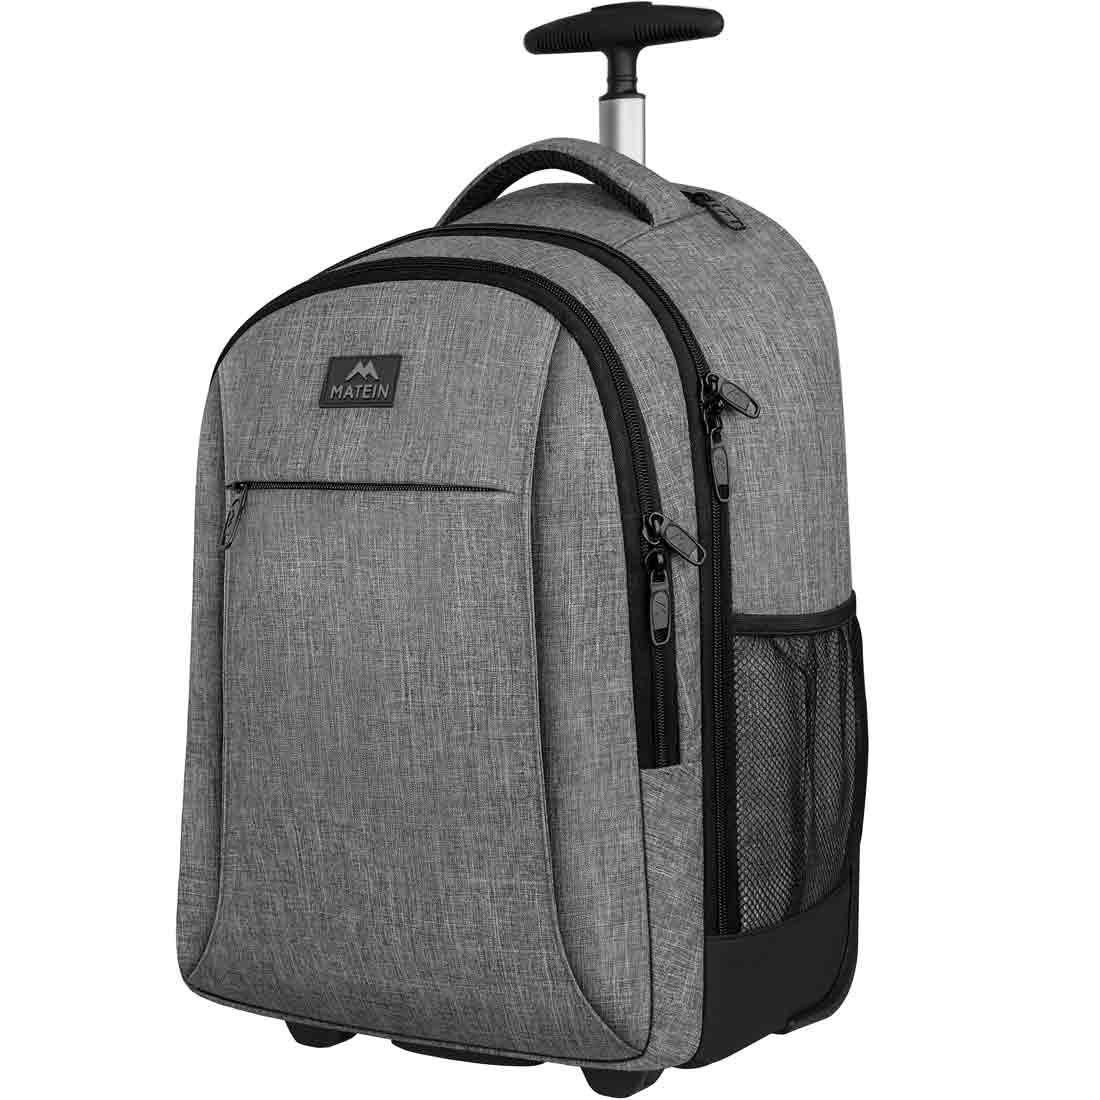 Matein Lightweight Backpack with Wheels